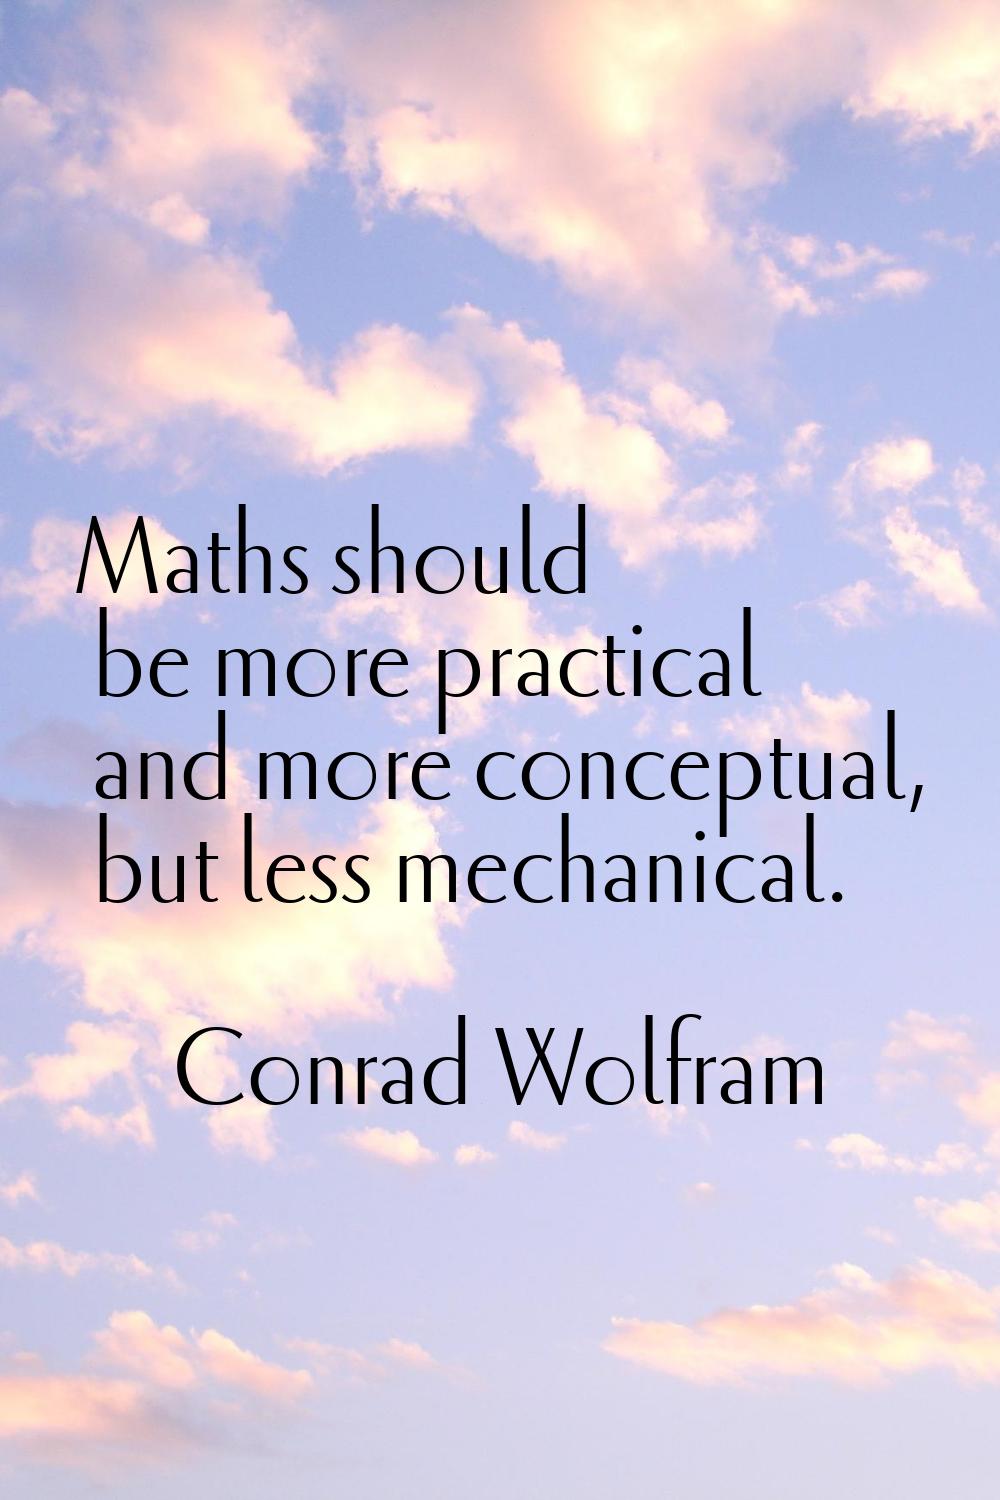 Maths should be more practical and more conceptual, but less mechanical.